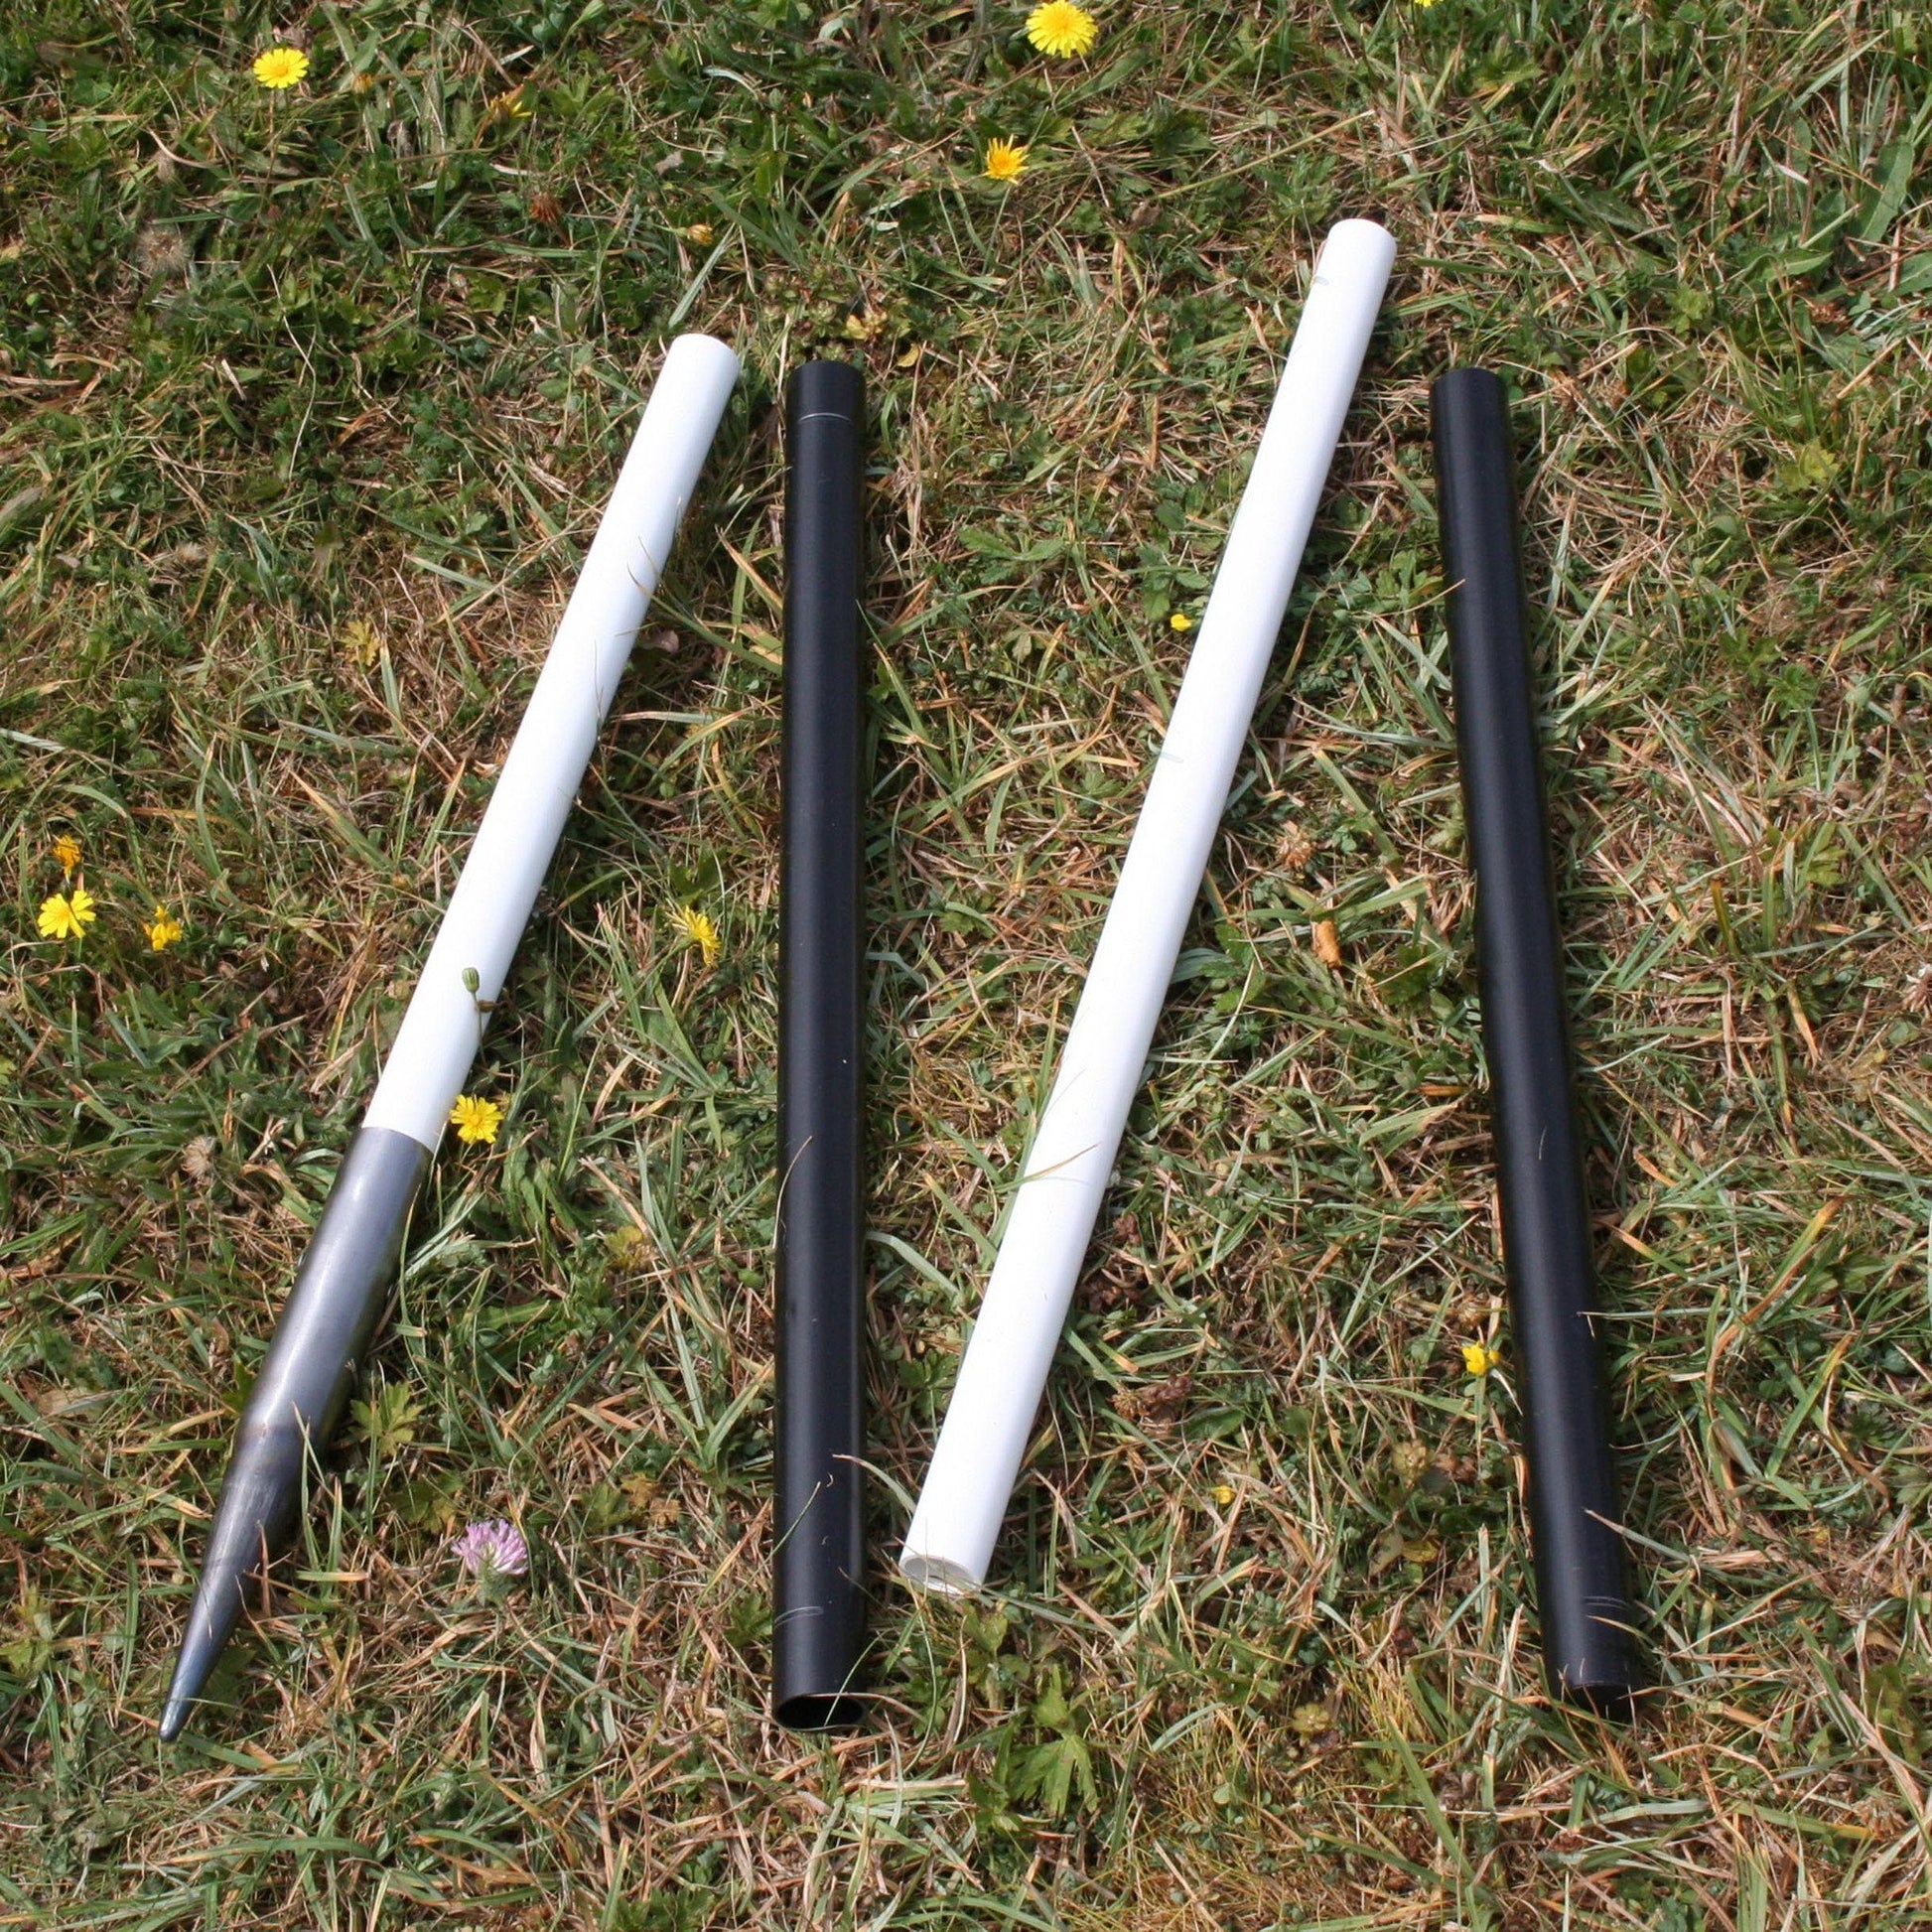 Fieldwork Equipment - Compact Ranging Poles - Ideal For Marking-out Key Points For Measuring